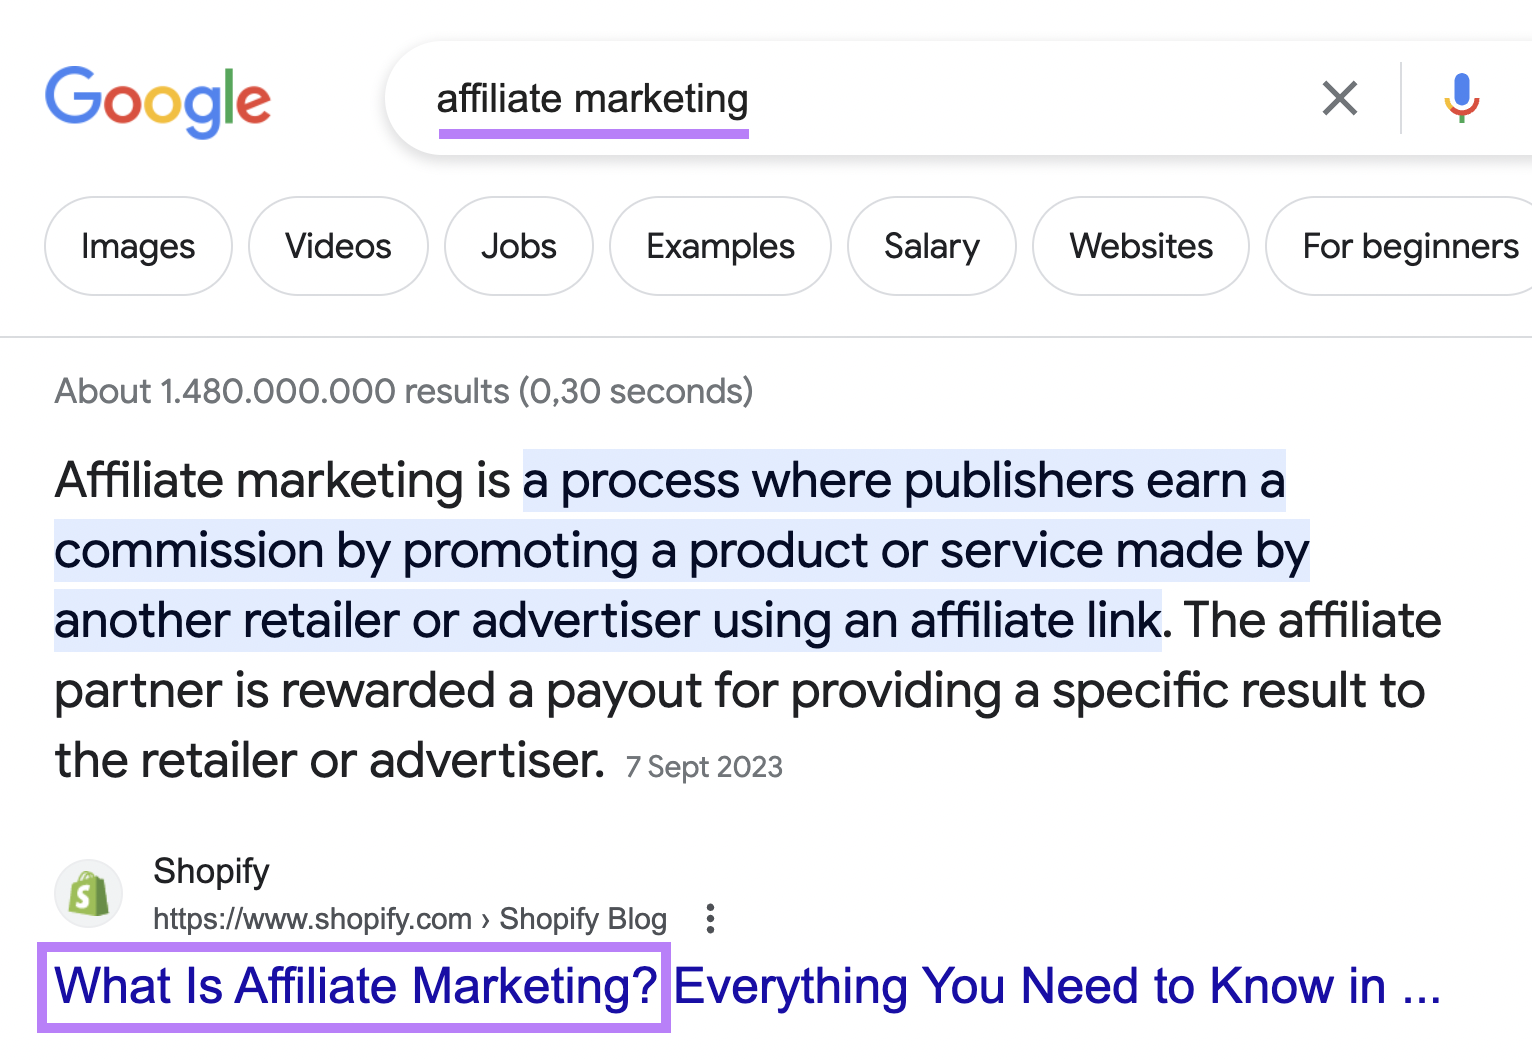 Shopify's article highlighted on SERP for “affiliate marketing” query